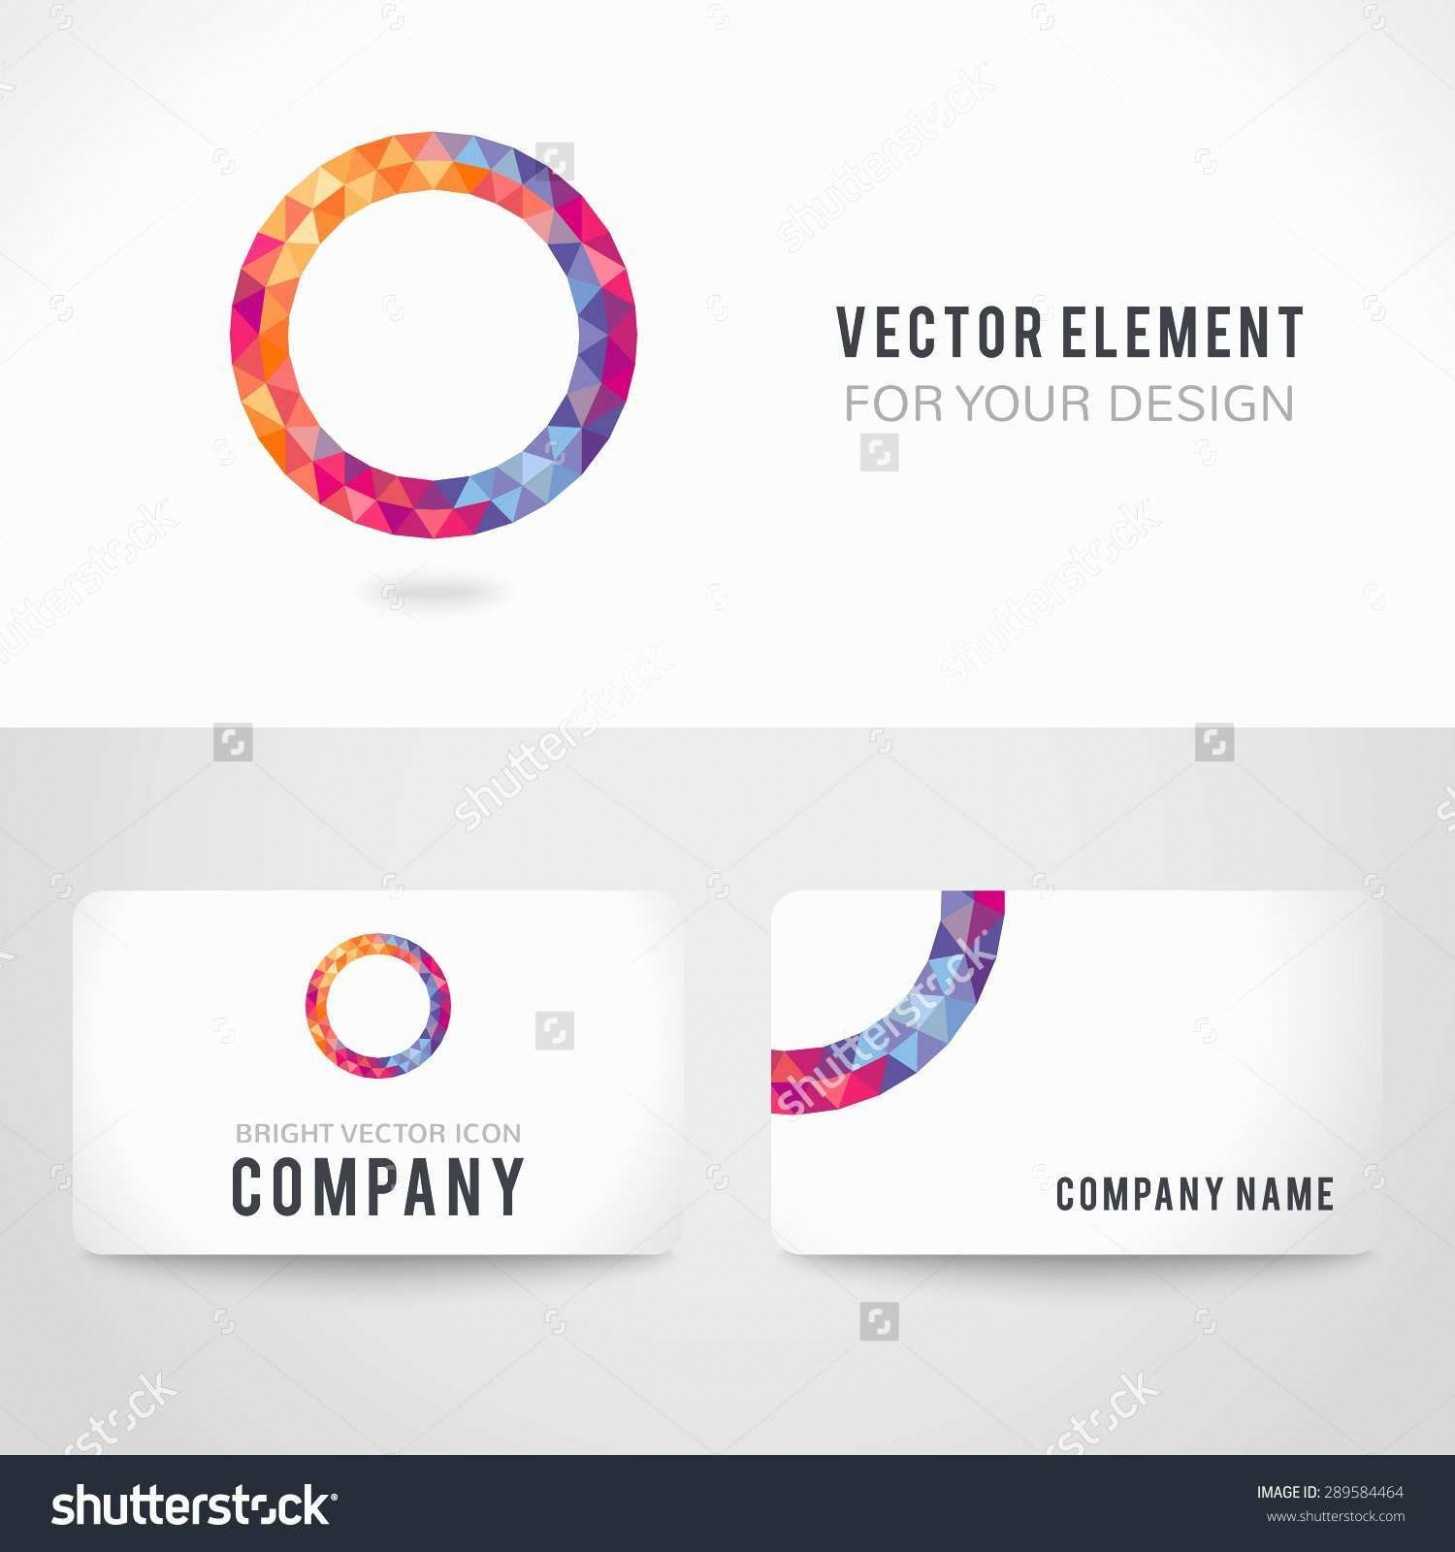 Advocare Spark Business Cards | Business Cards Throughout Advocare Business Card Template